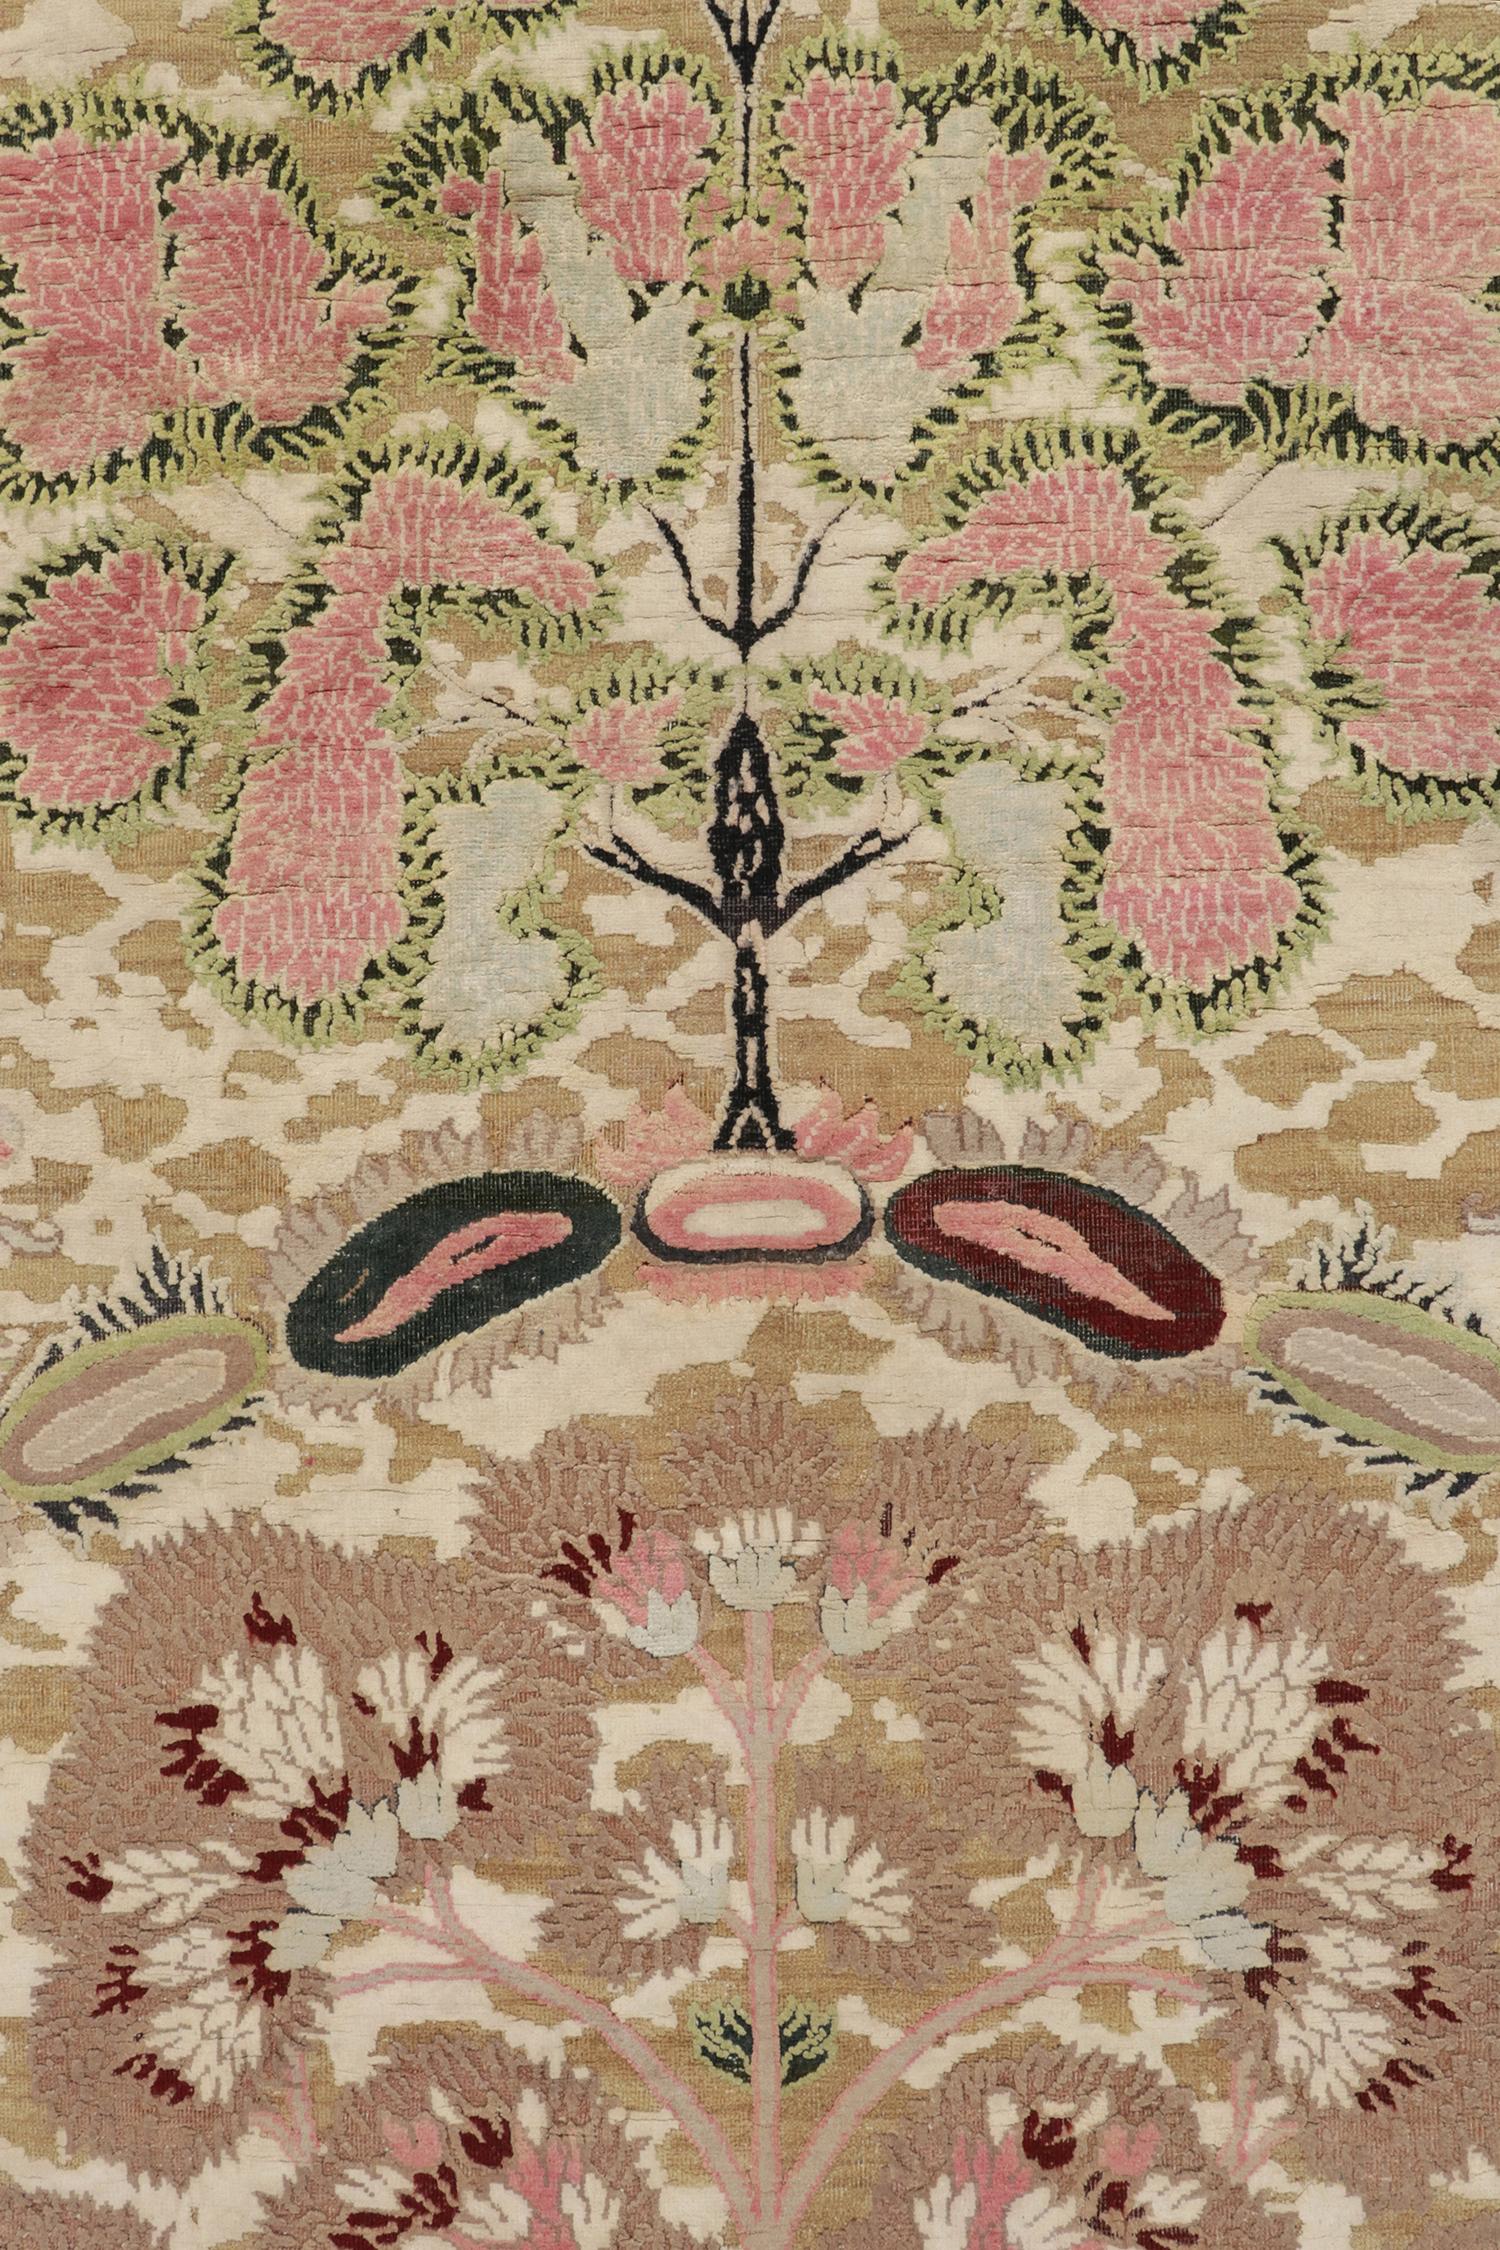 Wool Rug & Kilim’s Classic Style Rug in Green, Pink and Beige-Brown Floral Pattern For Sale